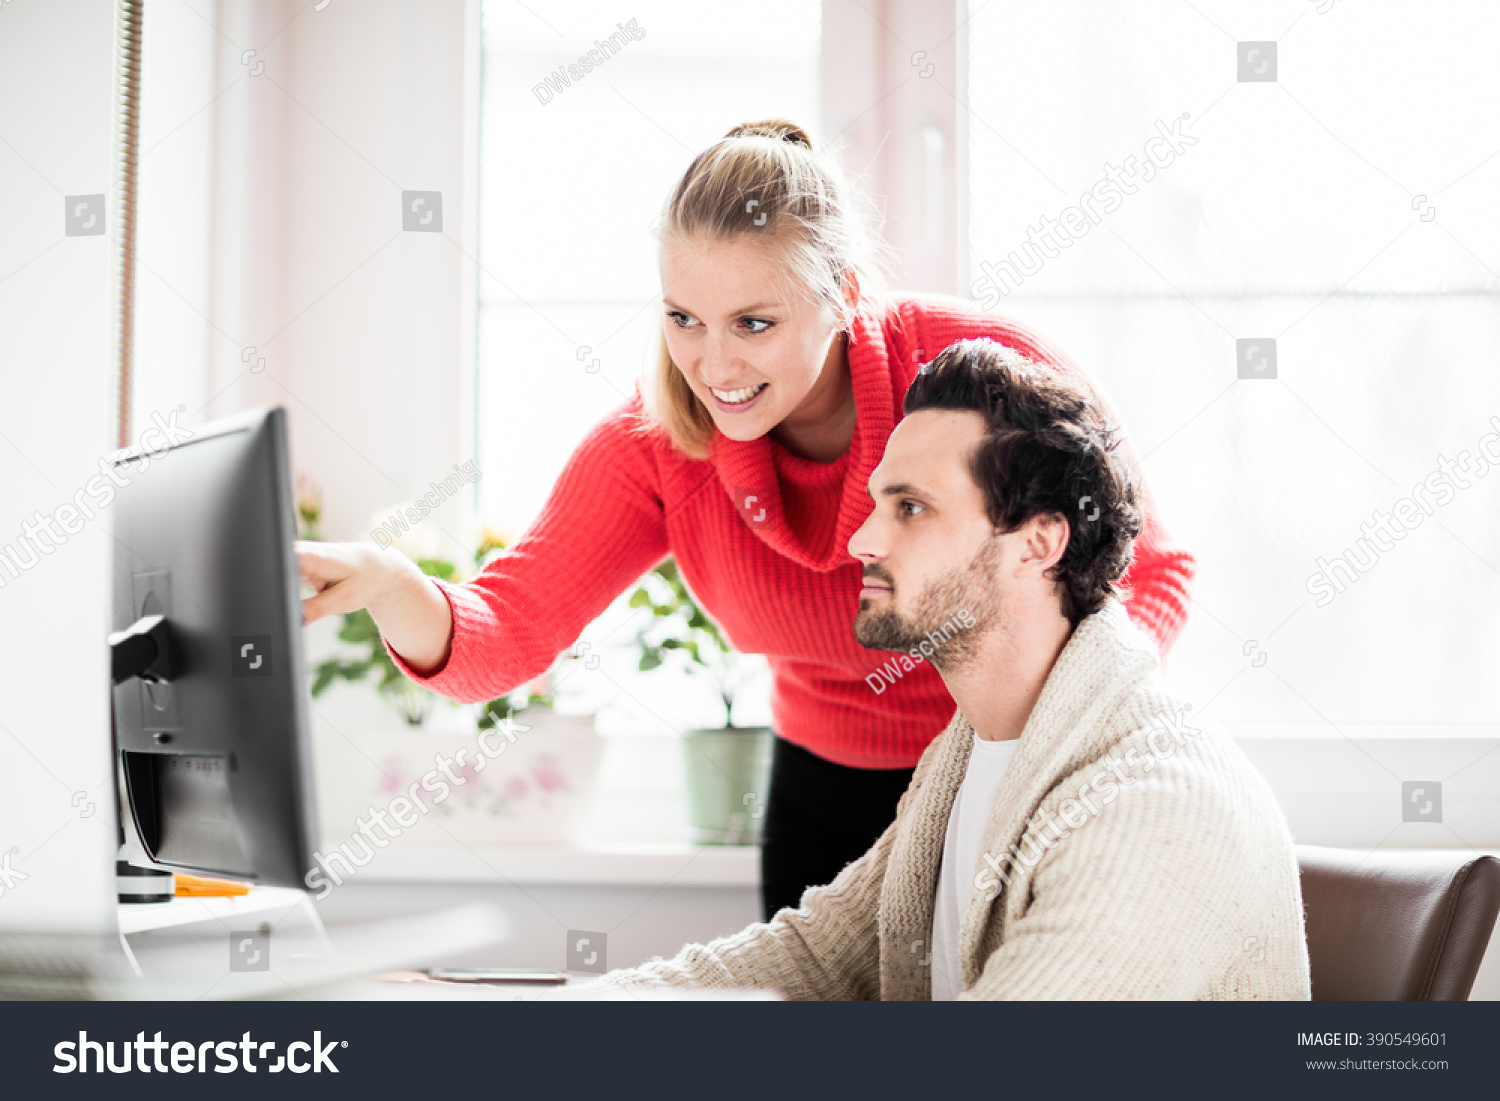 Couple working in home office with phone and computer #390549601